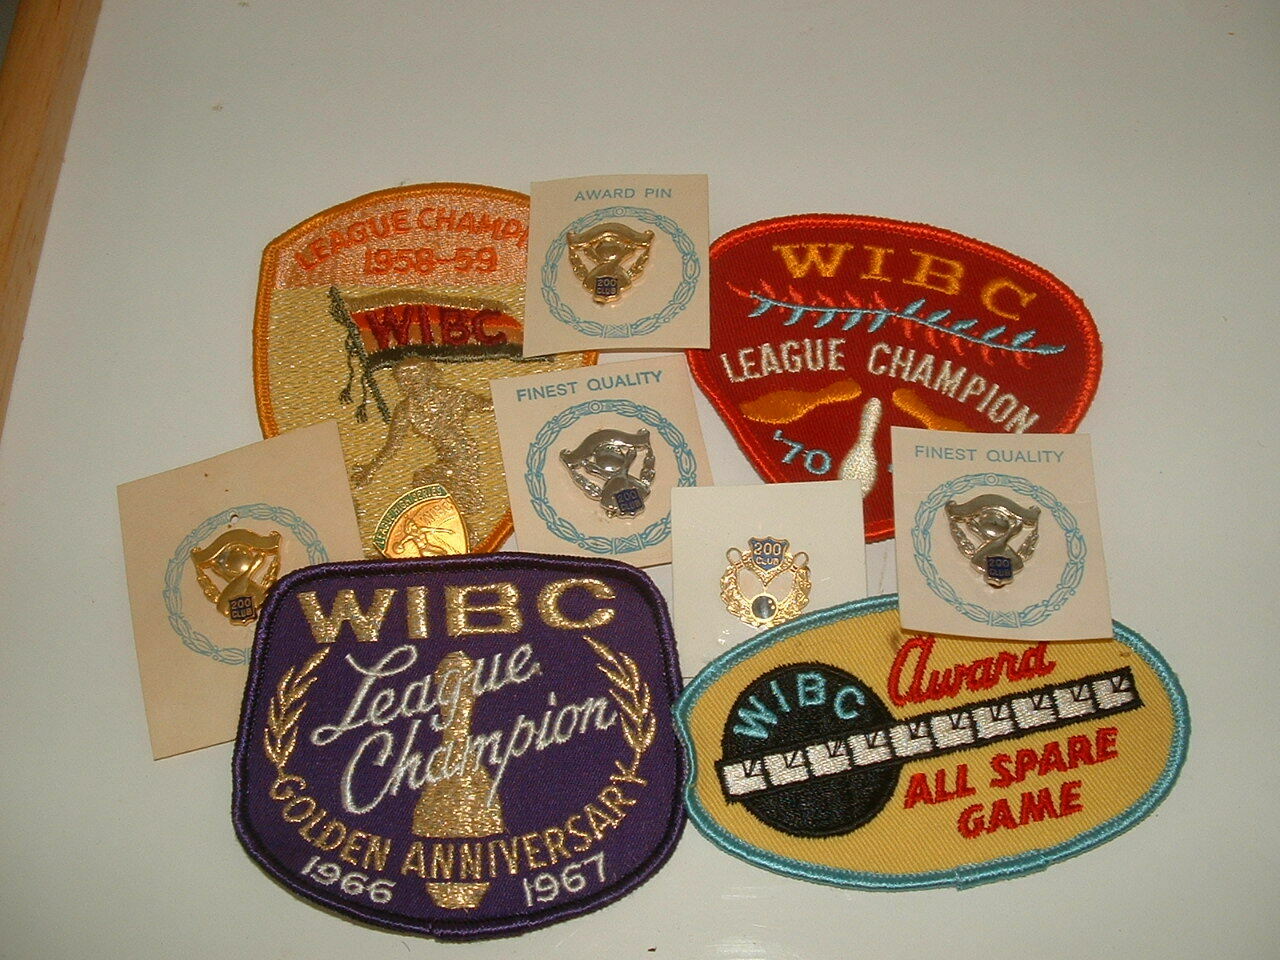 Wibc -akron, Ohio- Vintage Bowling Pins And Badges